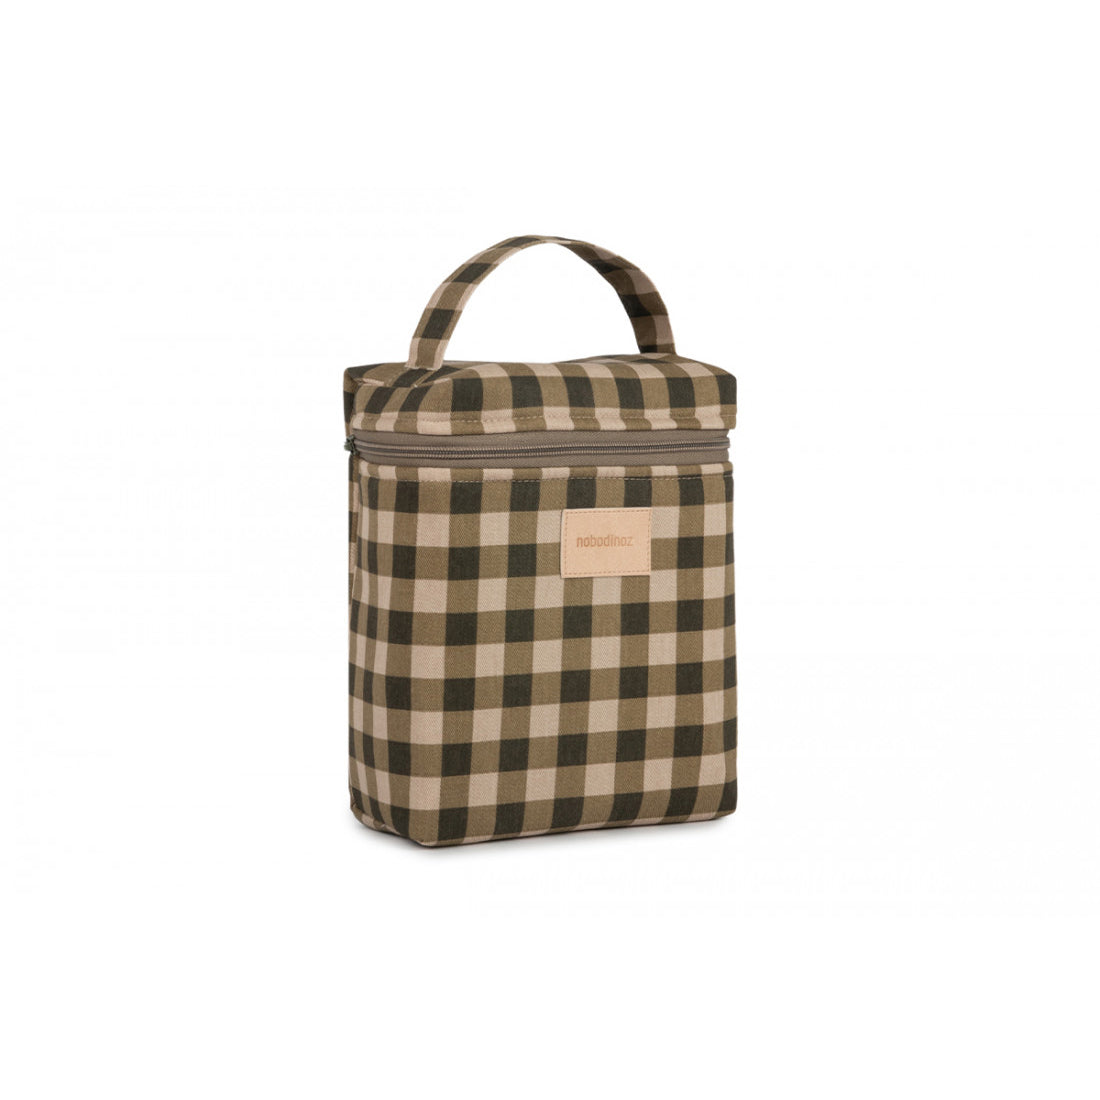 nobodinoz-hyde-park-insulated-baby-bottle-and-lunch-bag-green-checks-nobo-4926920